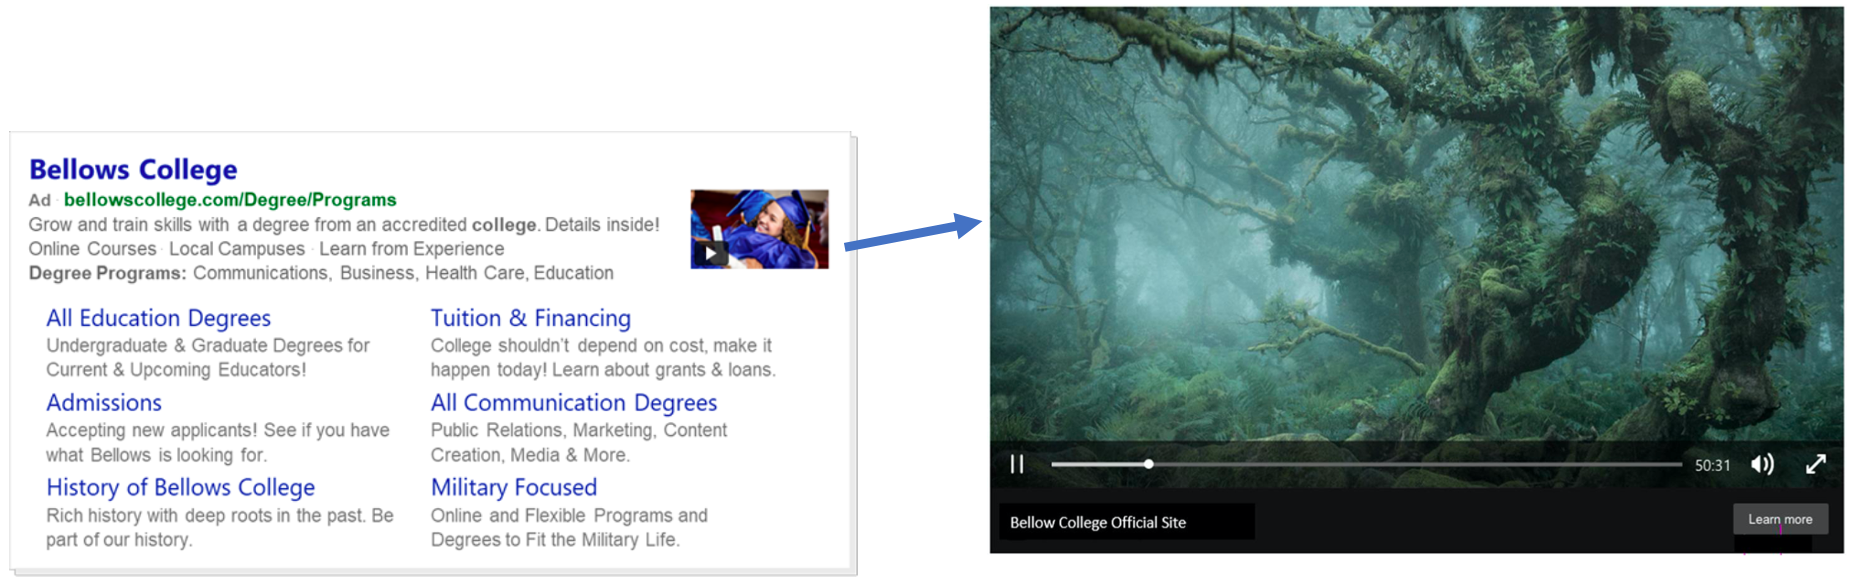 Microsoft Ads Video Extensions